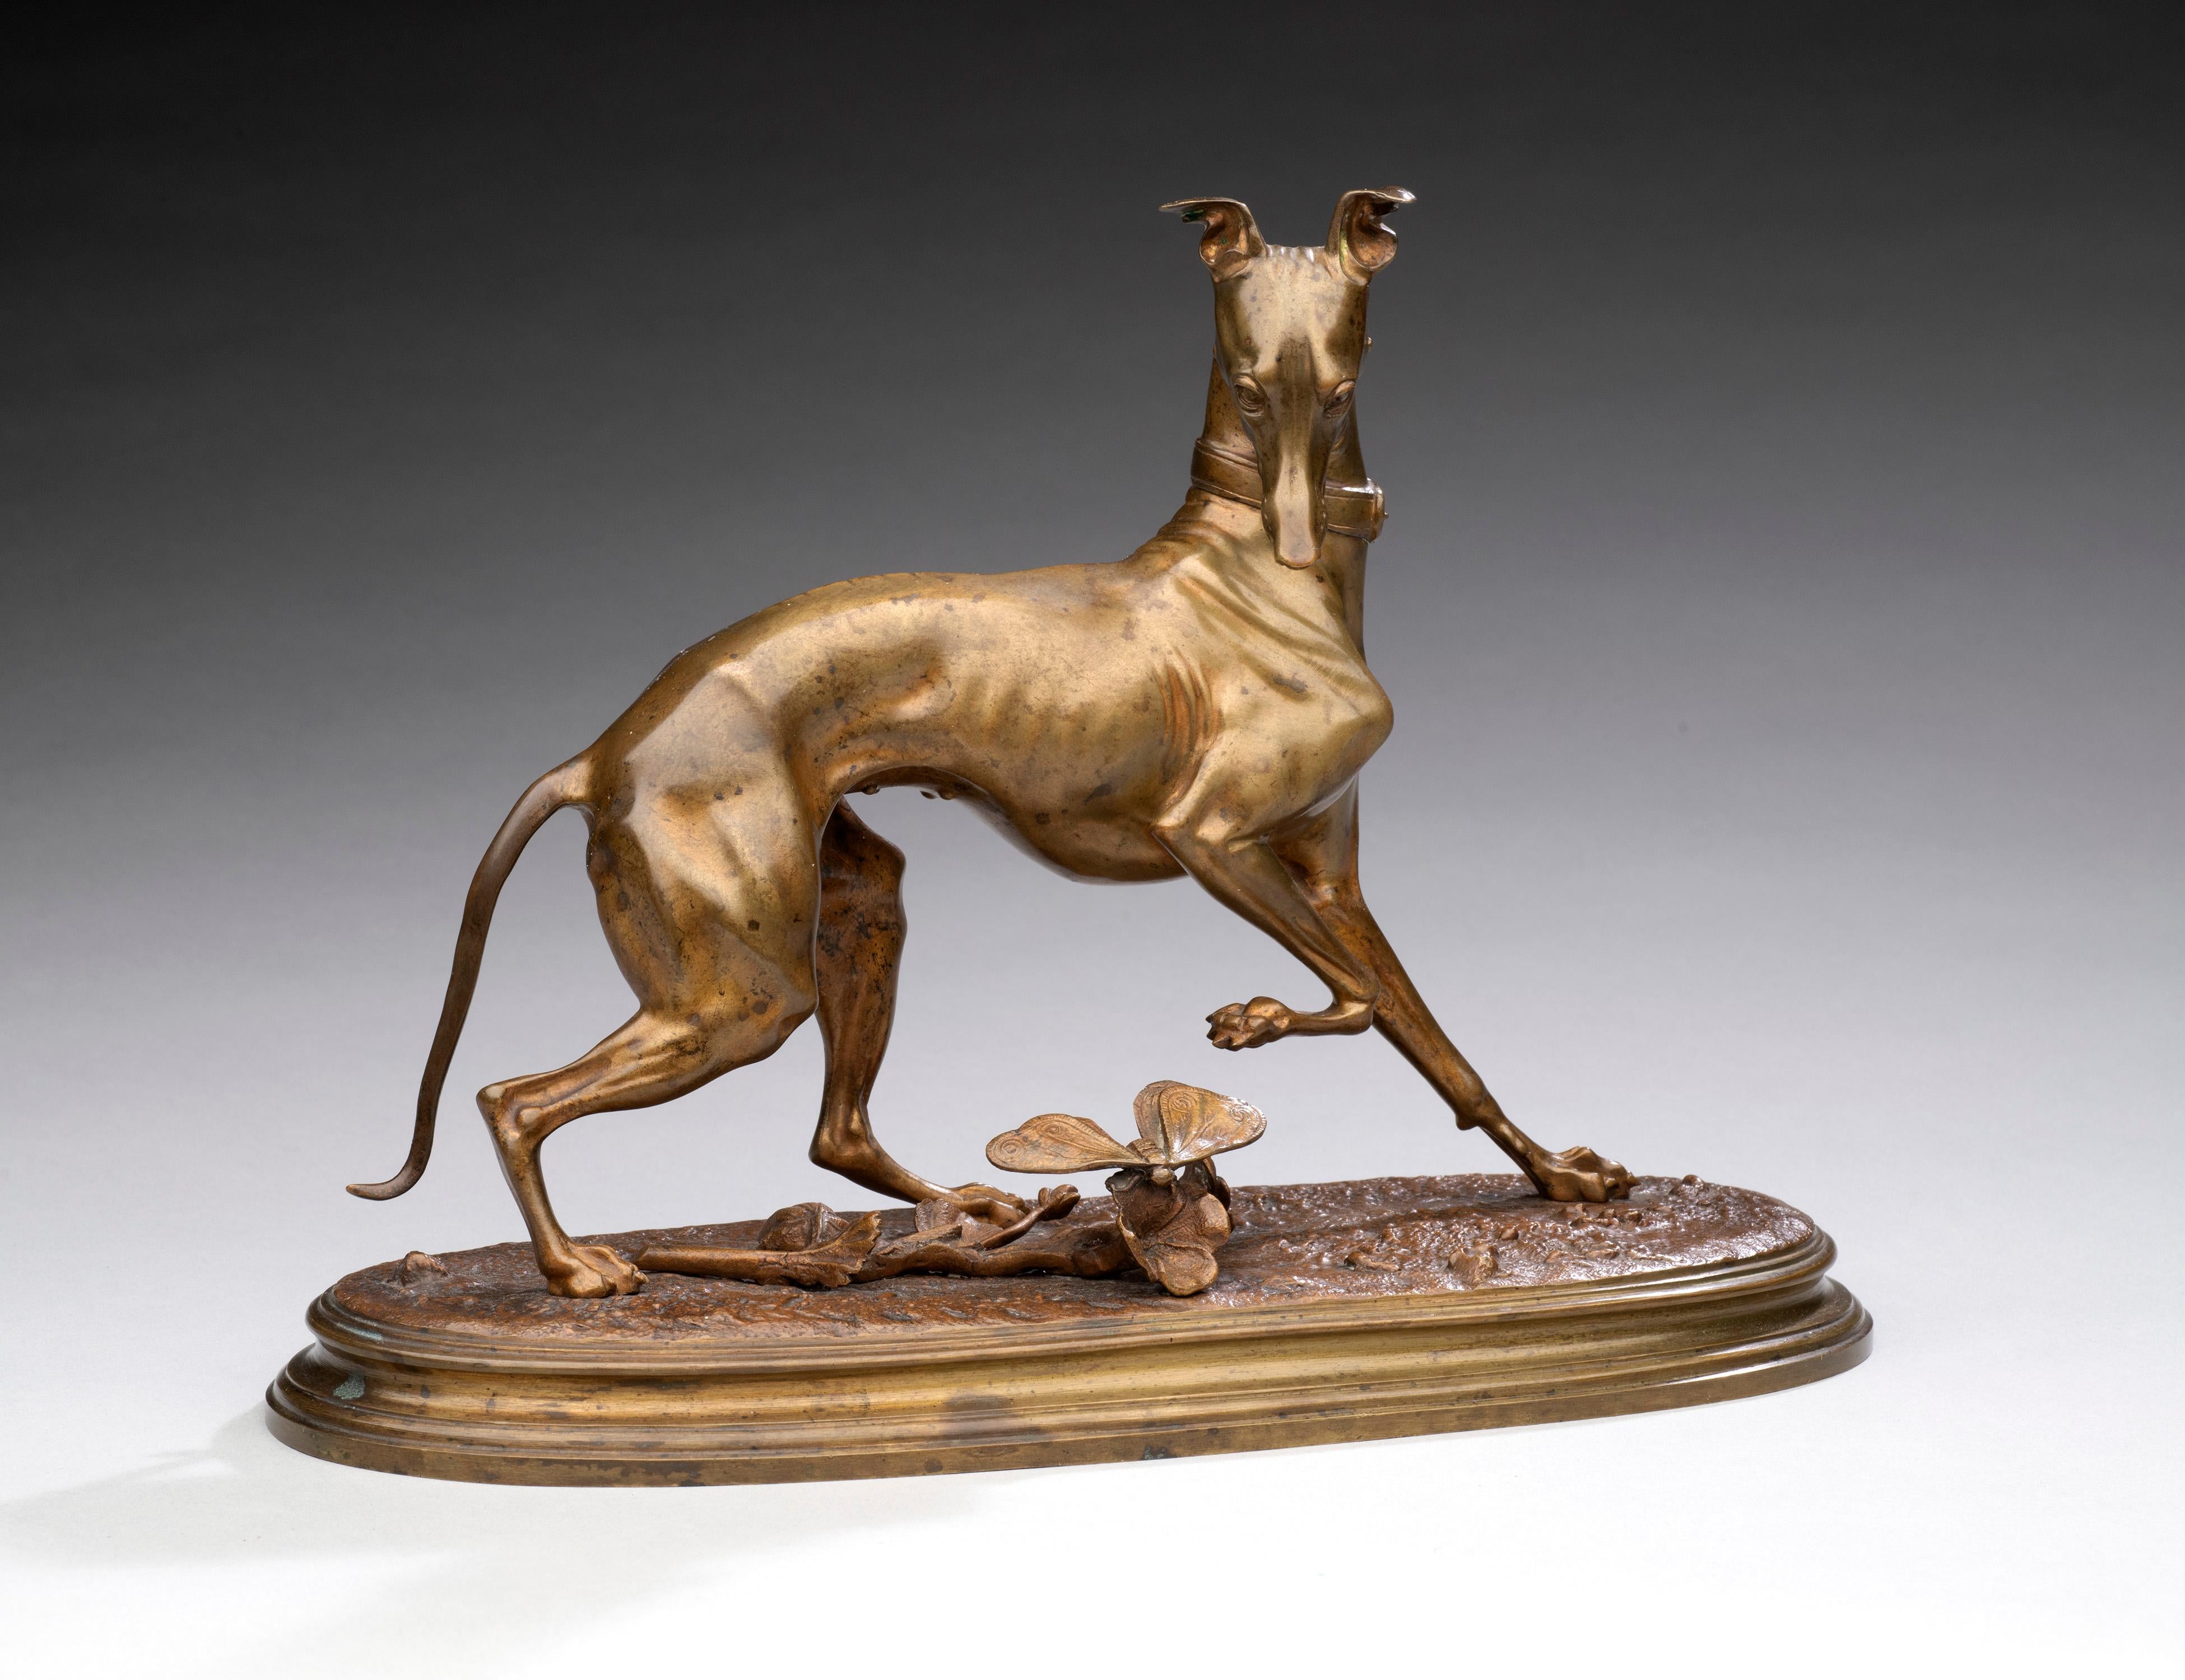 Antique Bronze Dog Portrait
“La Levrette au Papillon” or “Whippet (Greyhound) with a Butterfly”  
Arthur Waagen (Germany, France 1833-1898)
Circa 1860’s
11 x 8 x 4  inches
(2of 2. Not a pair.)

Arthur Waagen was a German-born sculptor and animalier